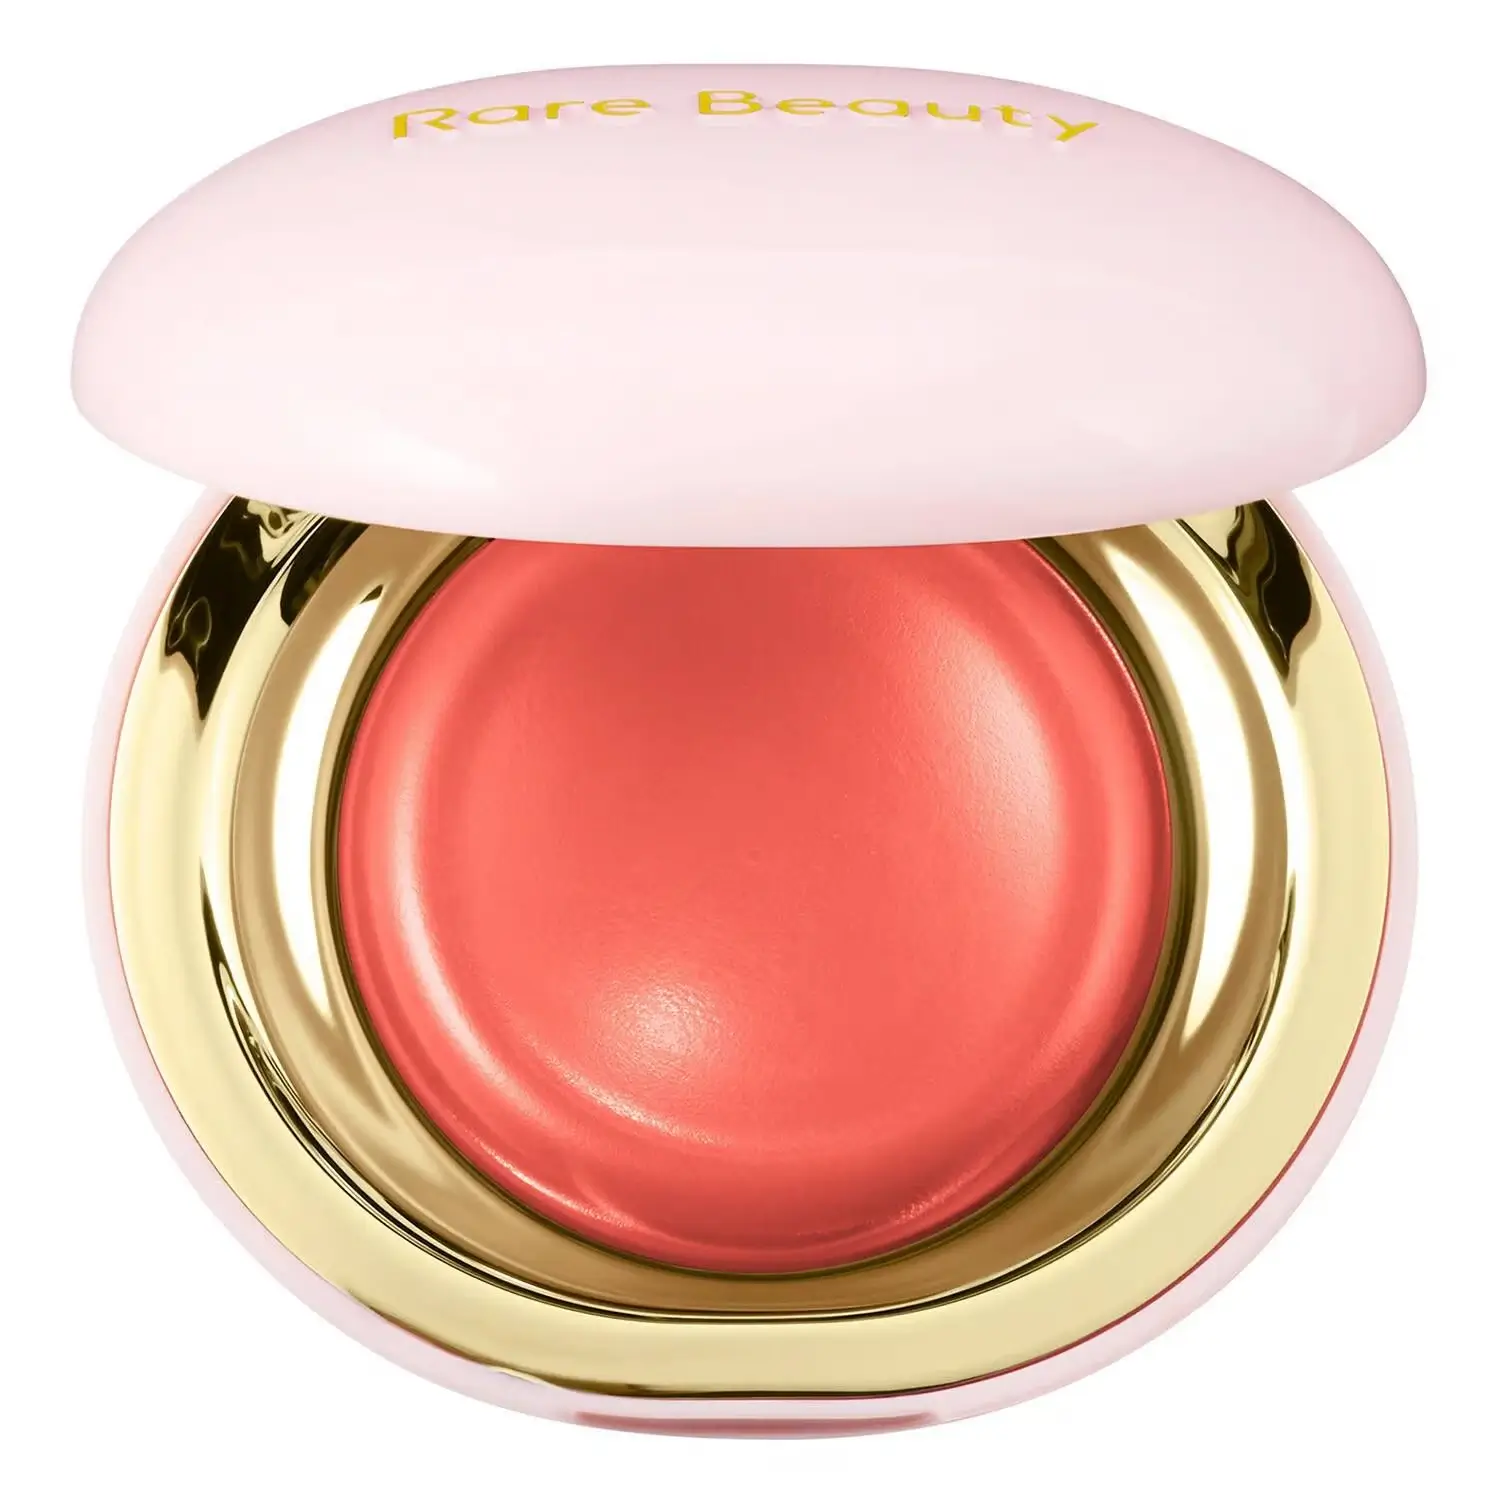 Rare Beauty Stay Vulnerable Melting Blush 5g Discounts and Cashback